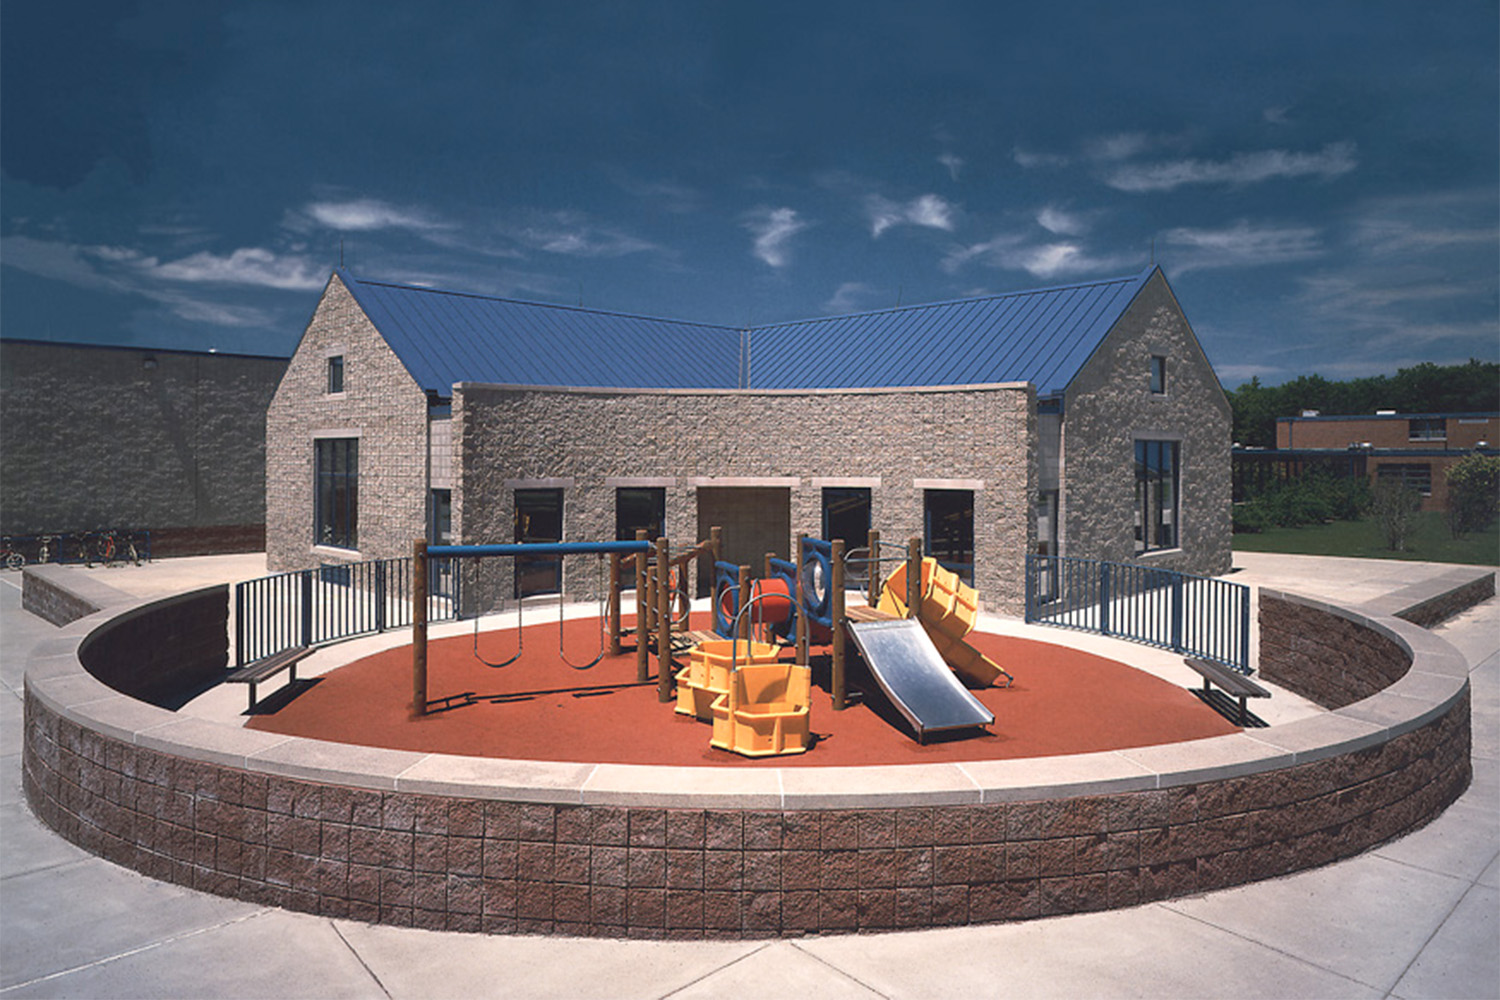 Kids playground with swing set and slides, with brick wall surrounding the playground